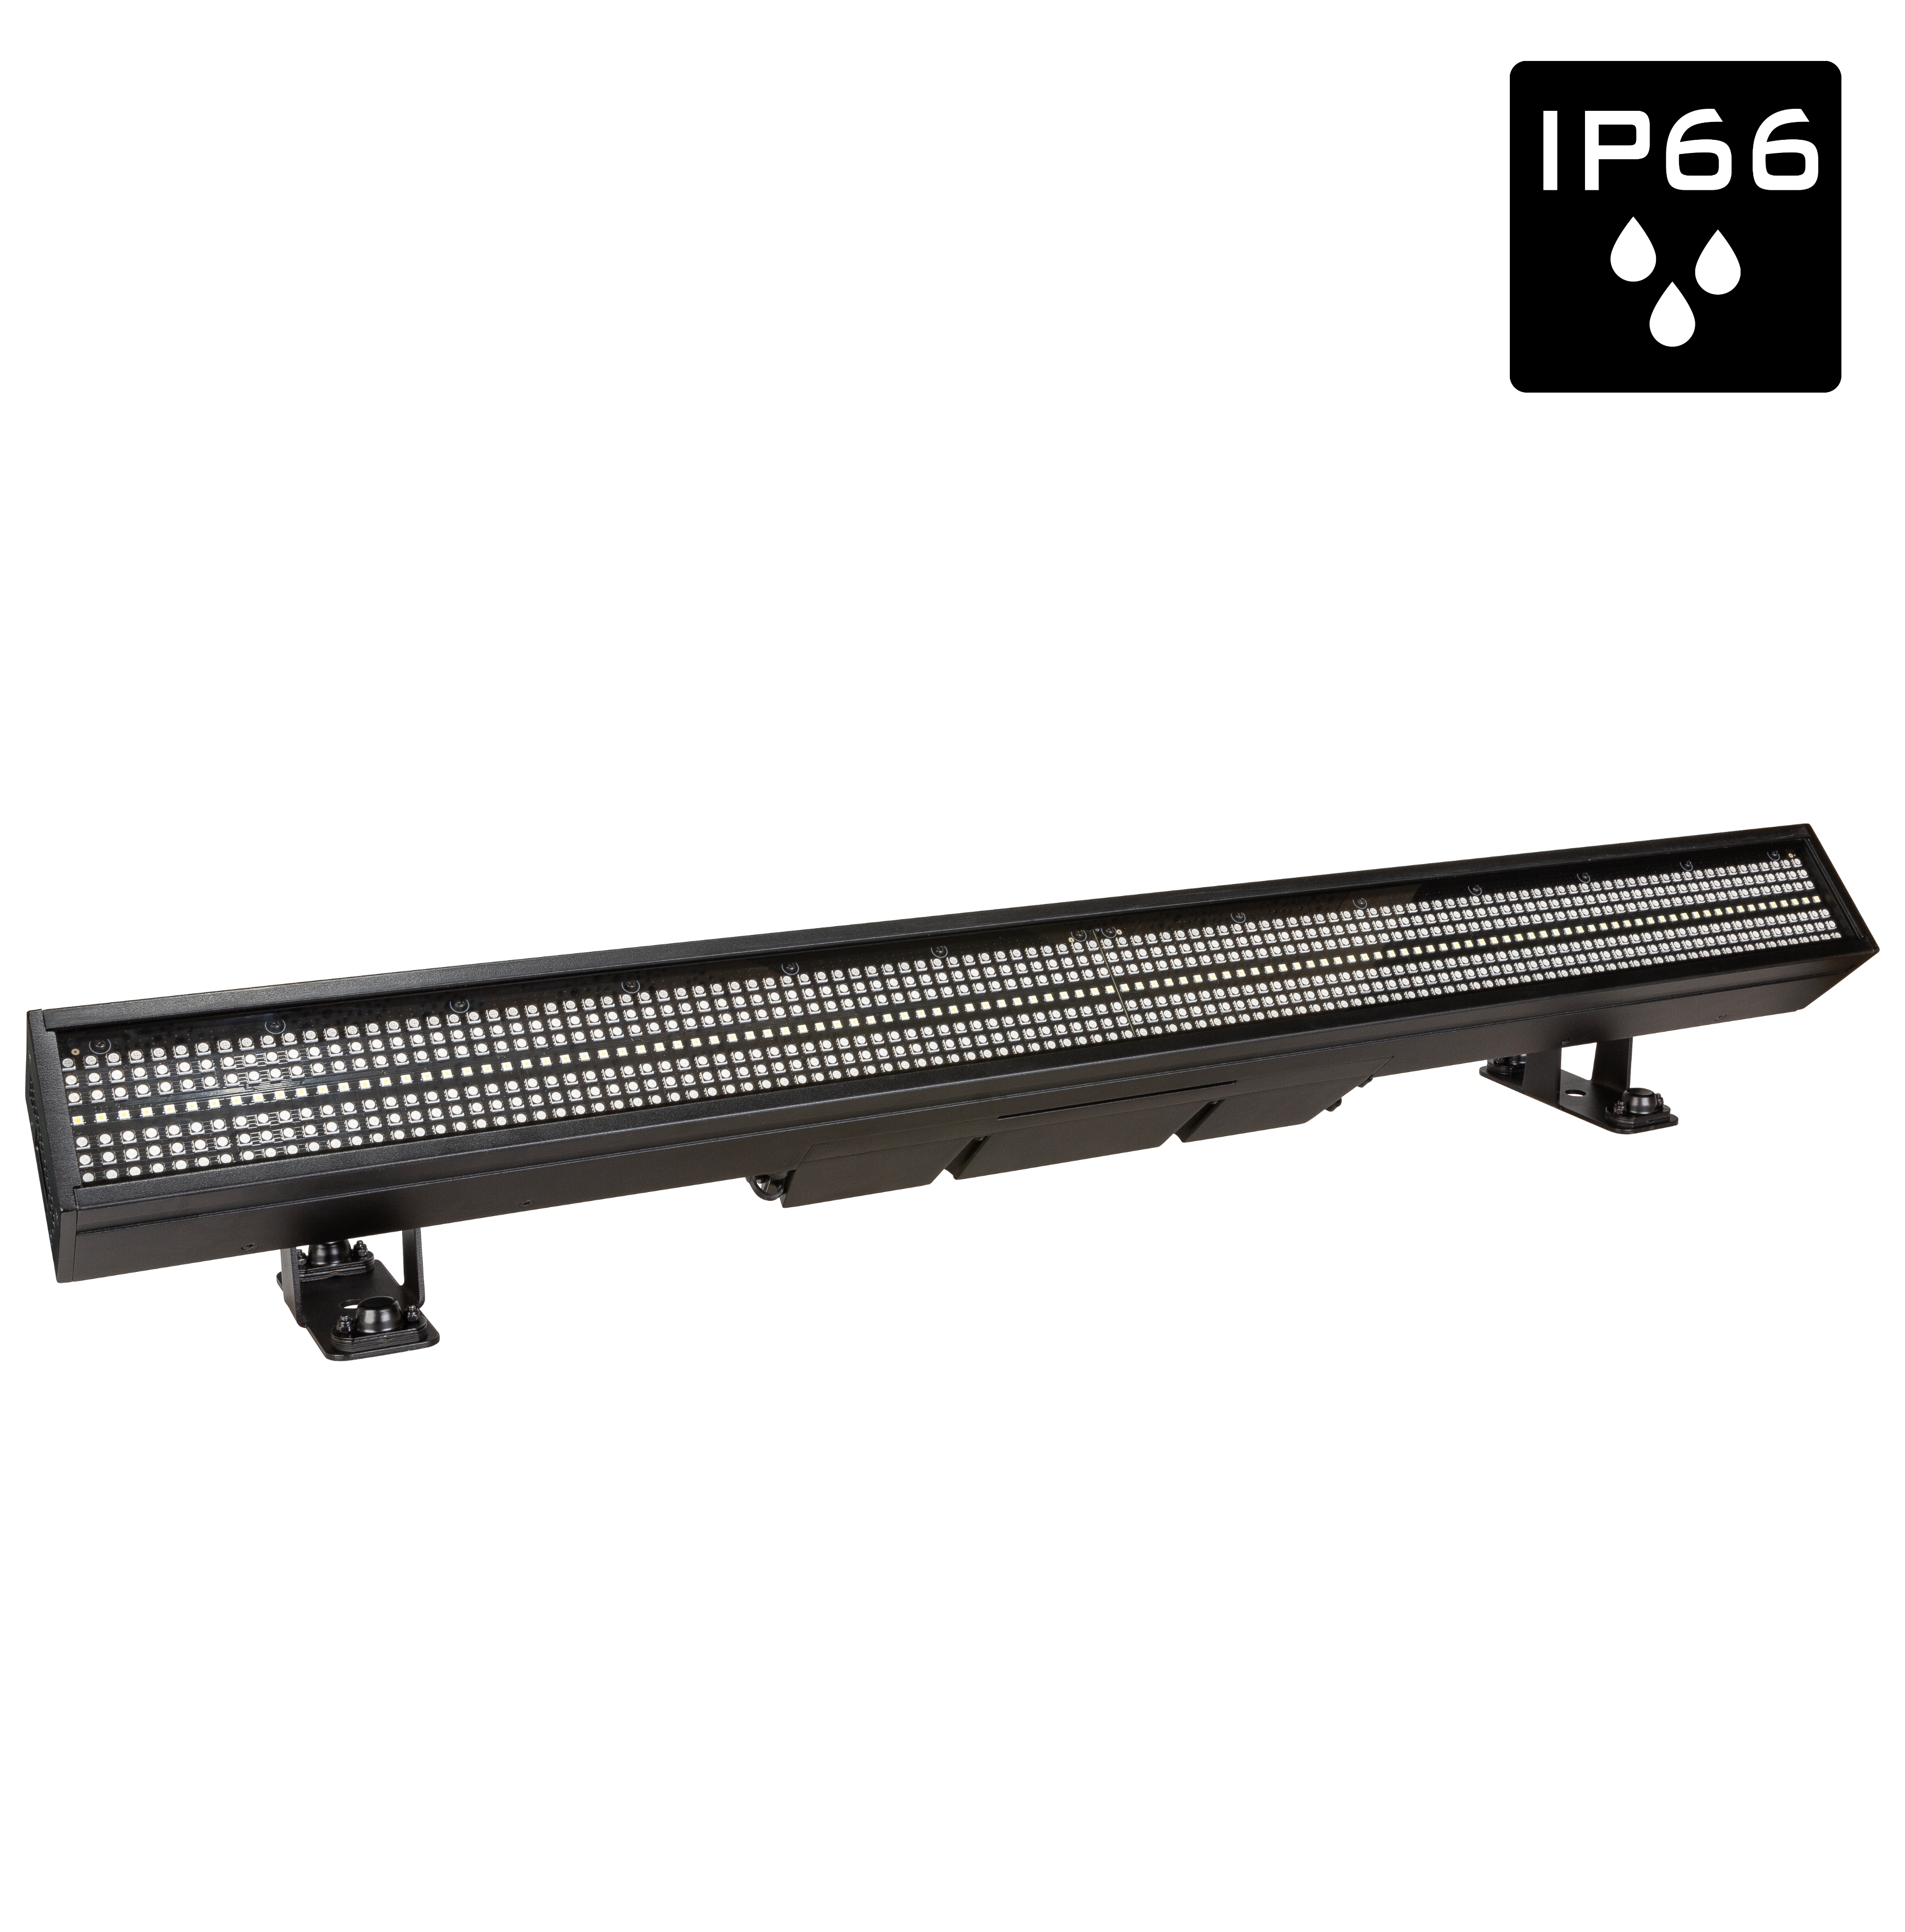 An extremely powerful and versatile OUTDOOR hybrid LED Pixel mapping bar with 112 super bright CW leds (16 zones) and 672 RGB leds (32 zones). Art-Net / sACN control: excellent for TV-studios, concert stages, Ǫ